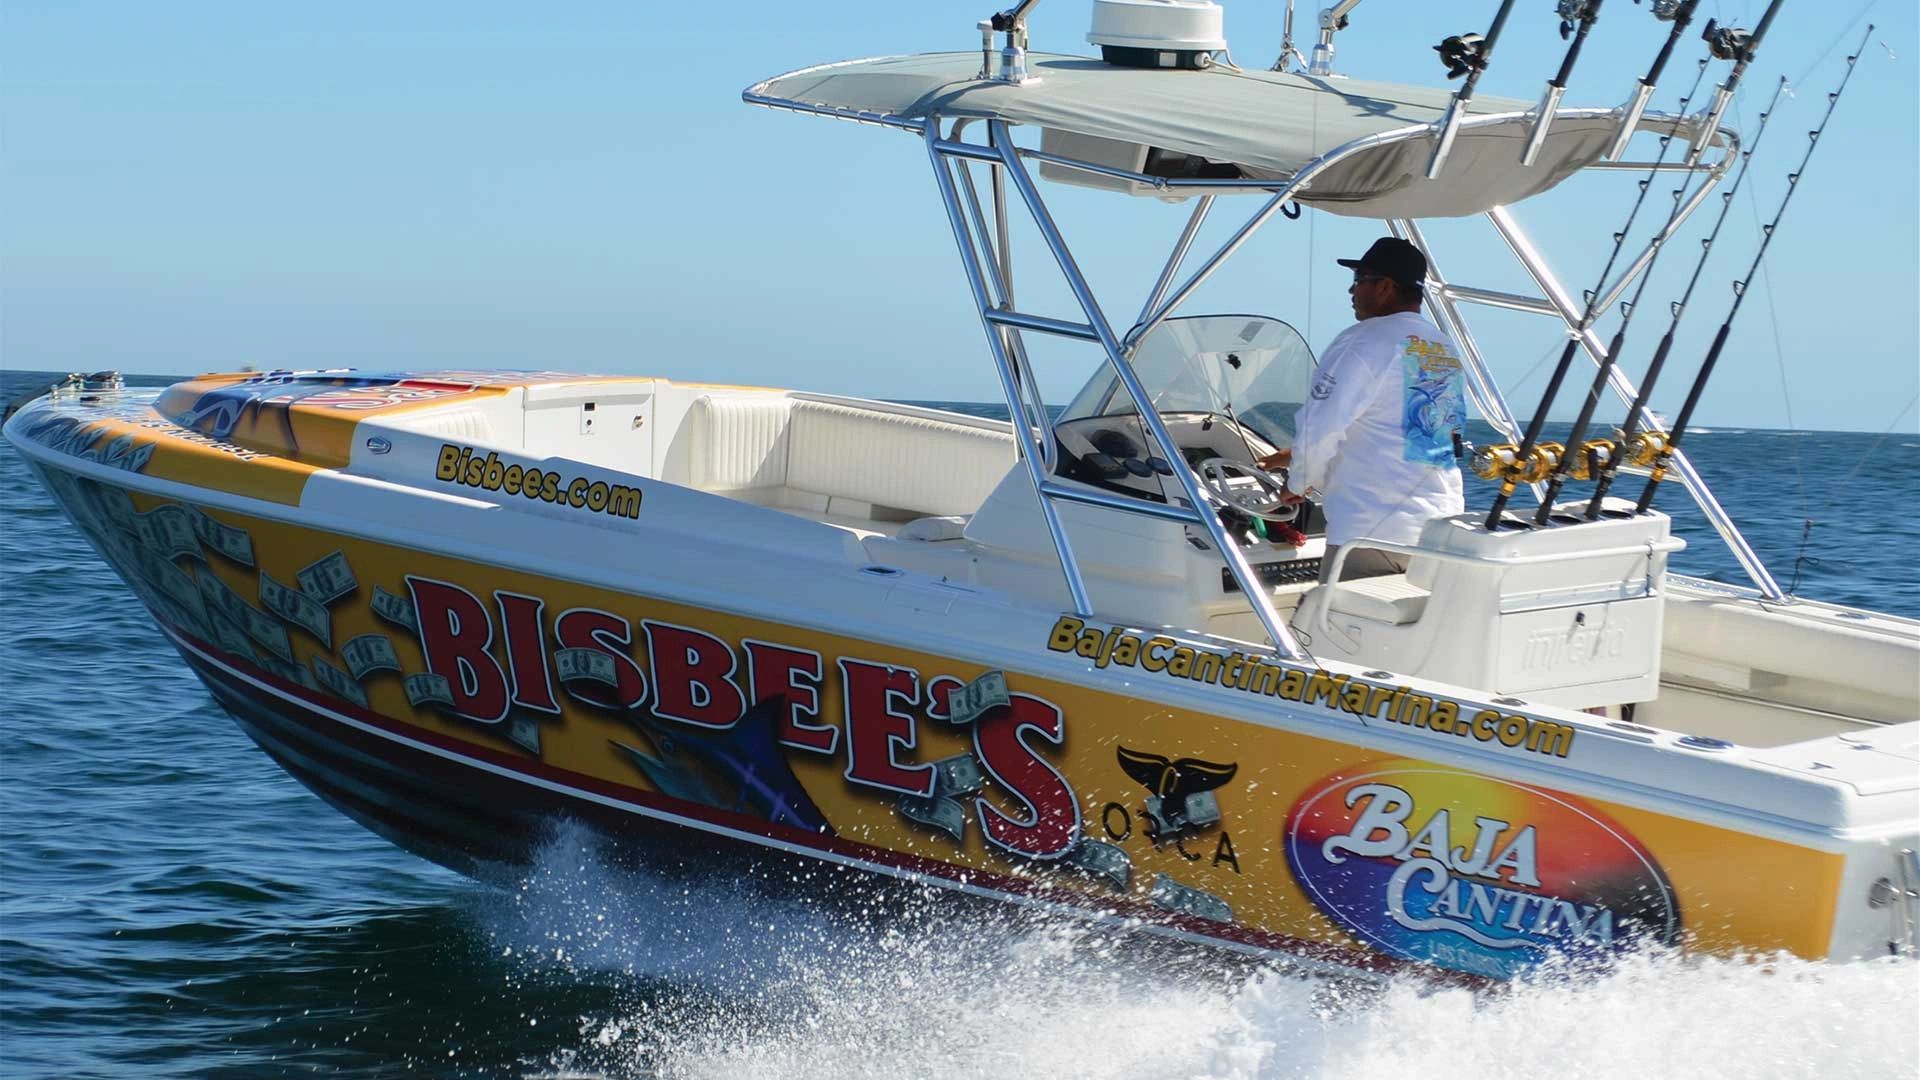 Bisbee's Black & Blue and Los Cabos Offshore Official Start Boat and Baja Cantina boat charters